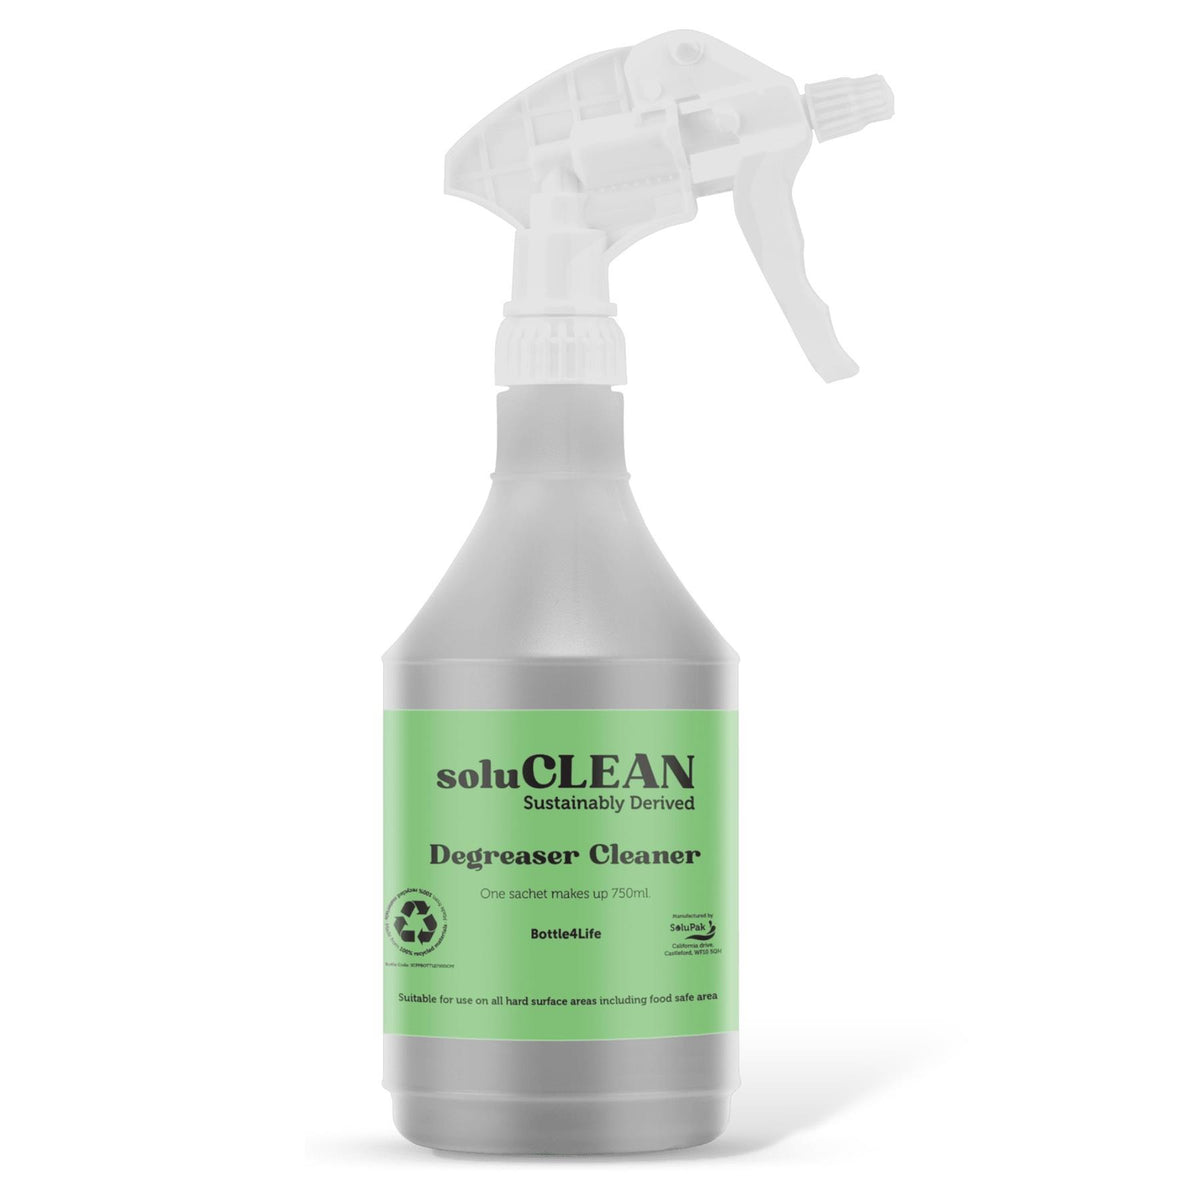 Soluclean, Degreaser Cleaner, 750ml Empty Trigger Spray Bottle for HouseHold Cleaning, Made from 100% Recycled Materials